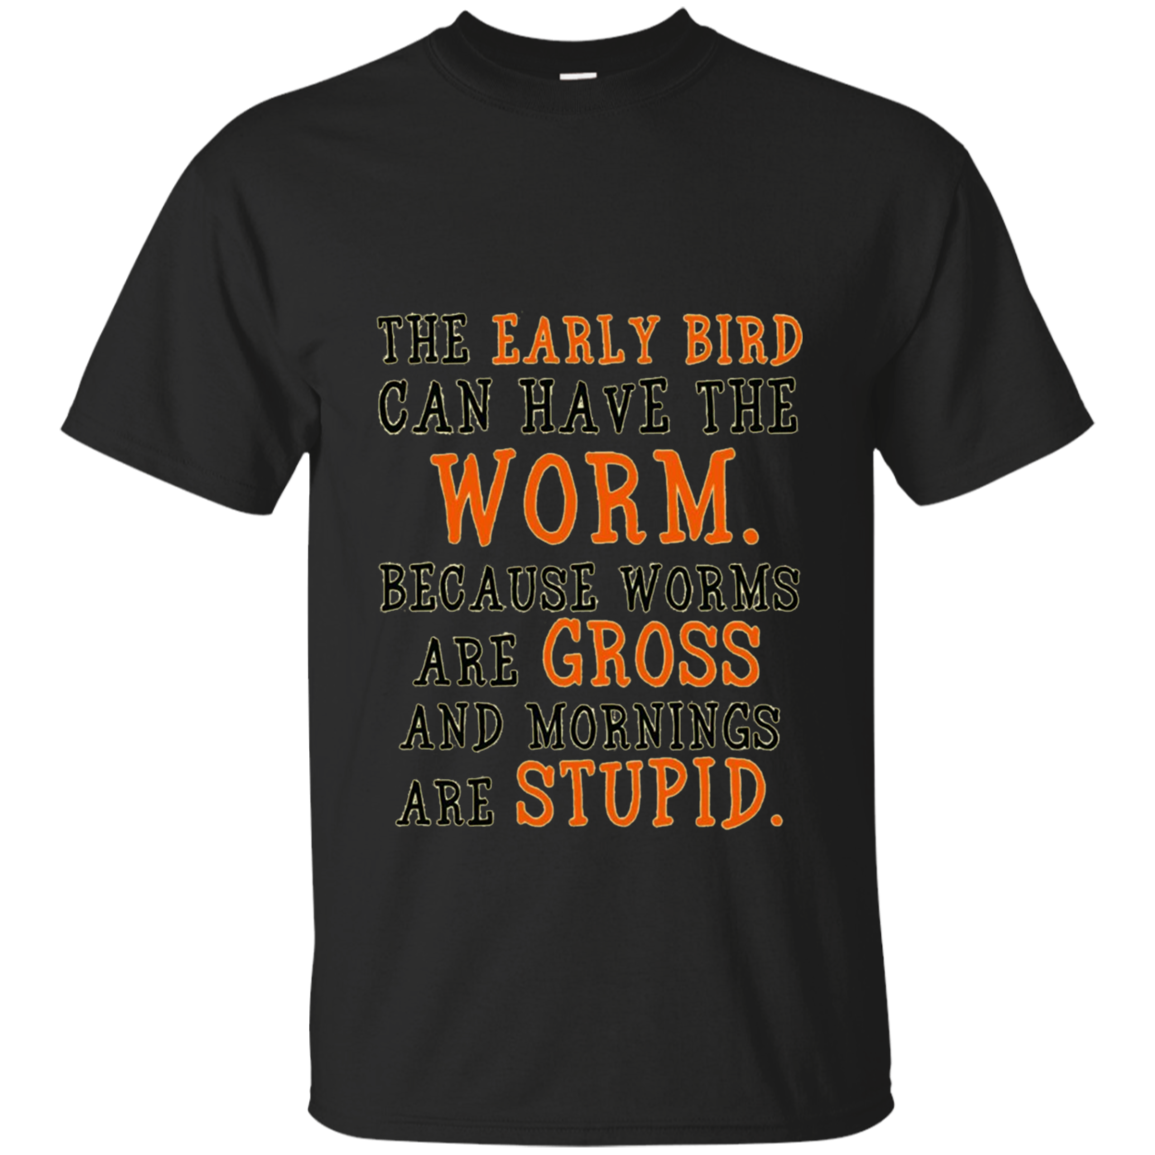 I Hate Mornings: The Early Bird Can Have The Worm Shirts